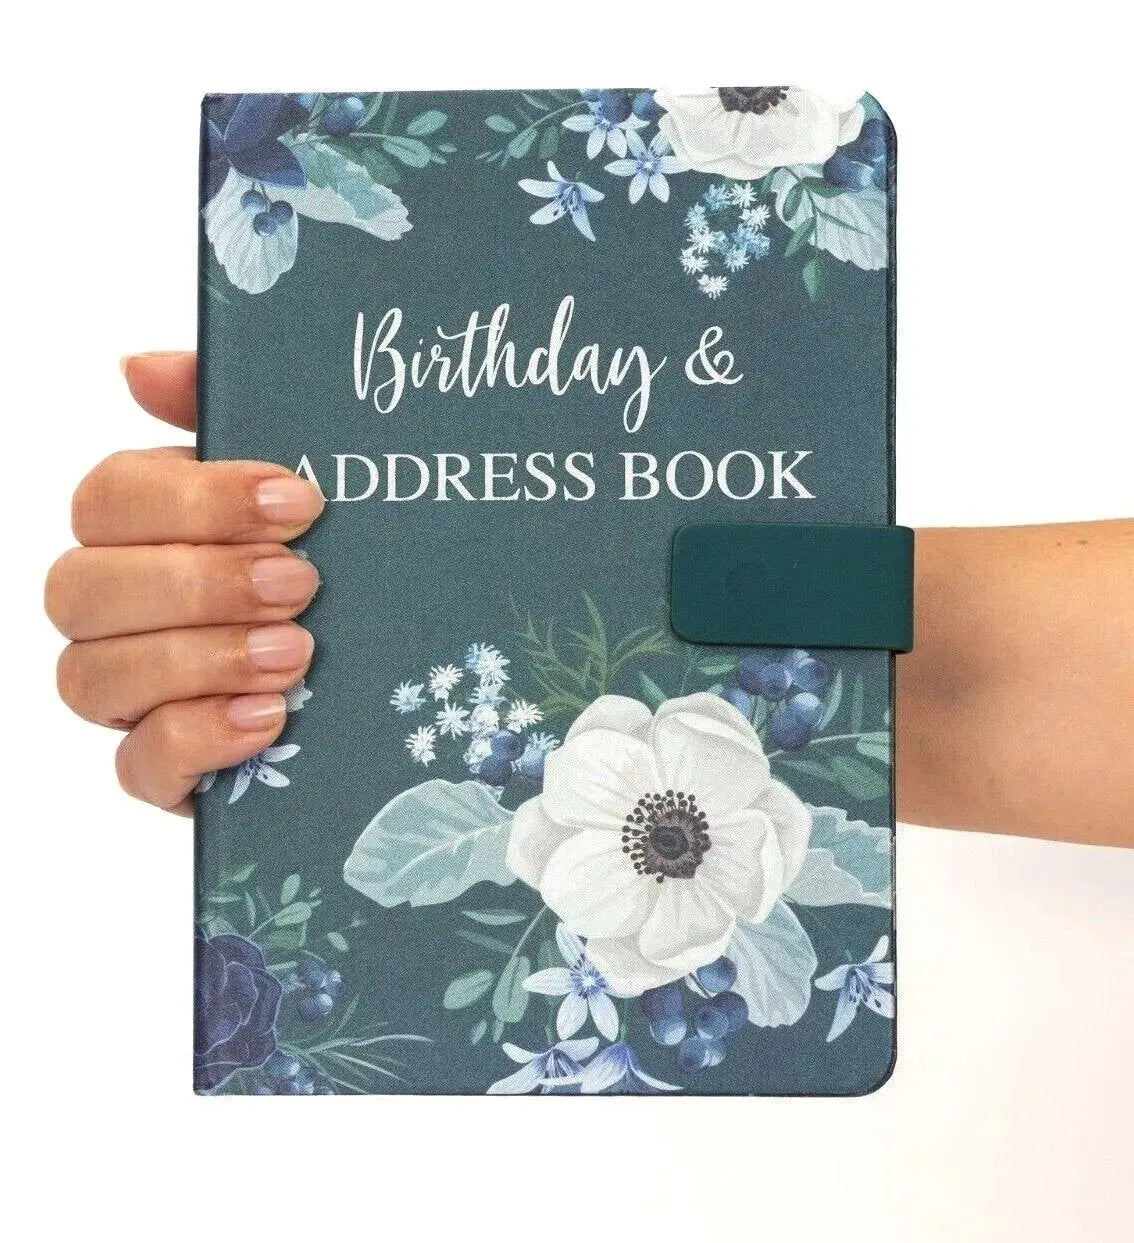 Address & Birthday Telephone Email Book A-Z Index Tabs Hard Back Contact Keechi & co.